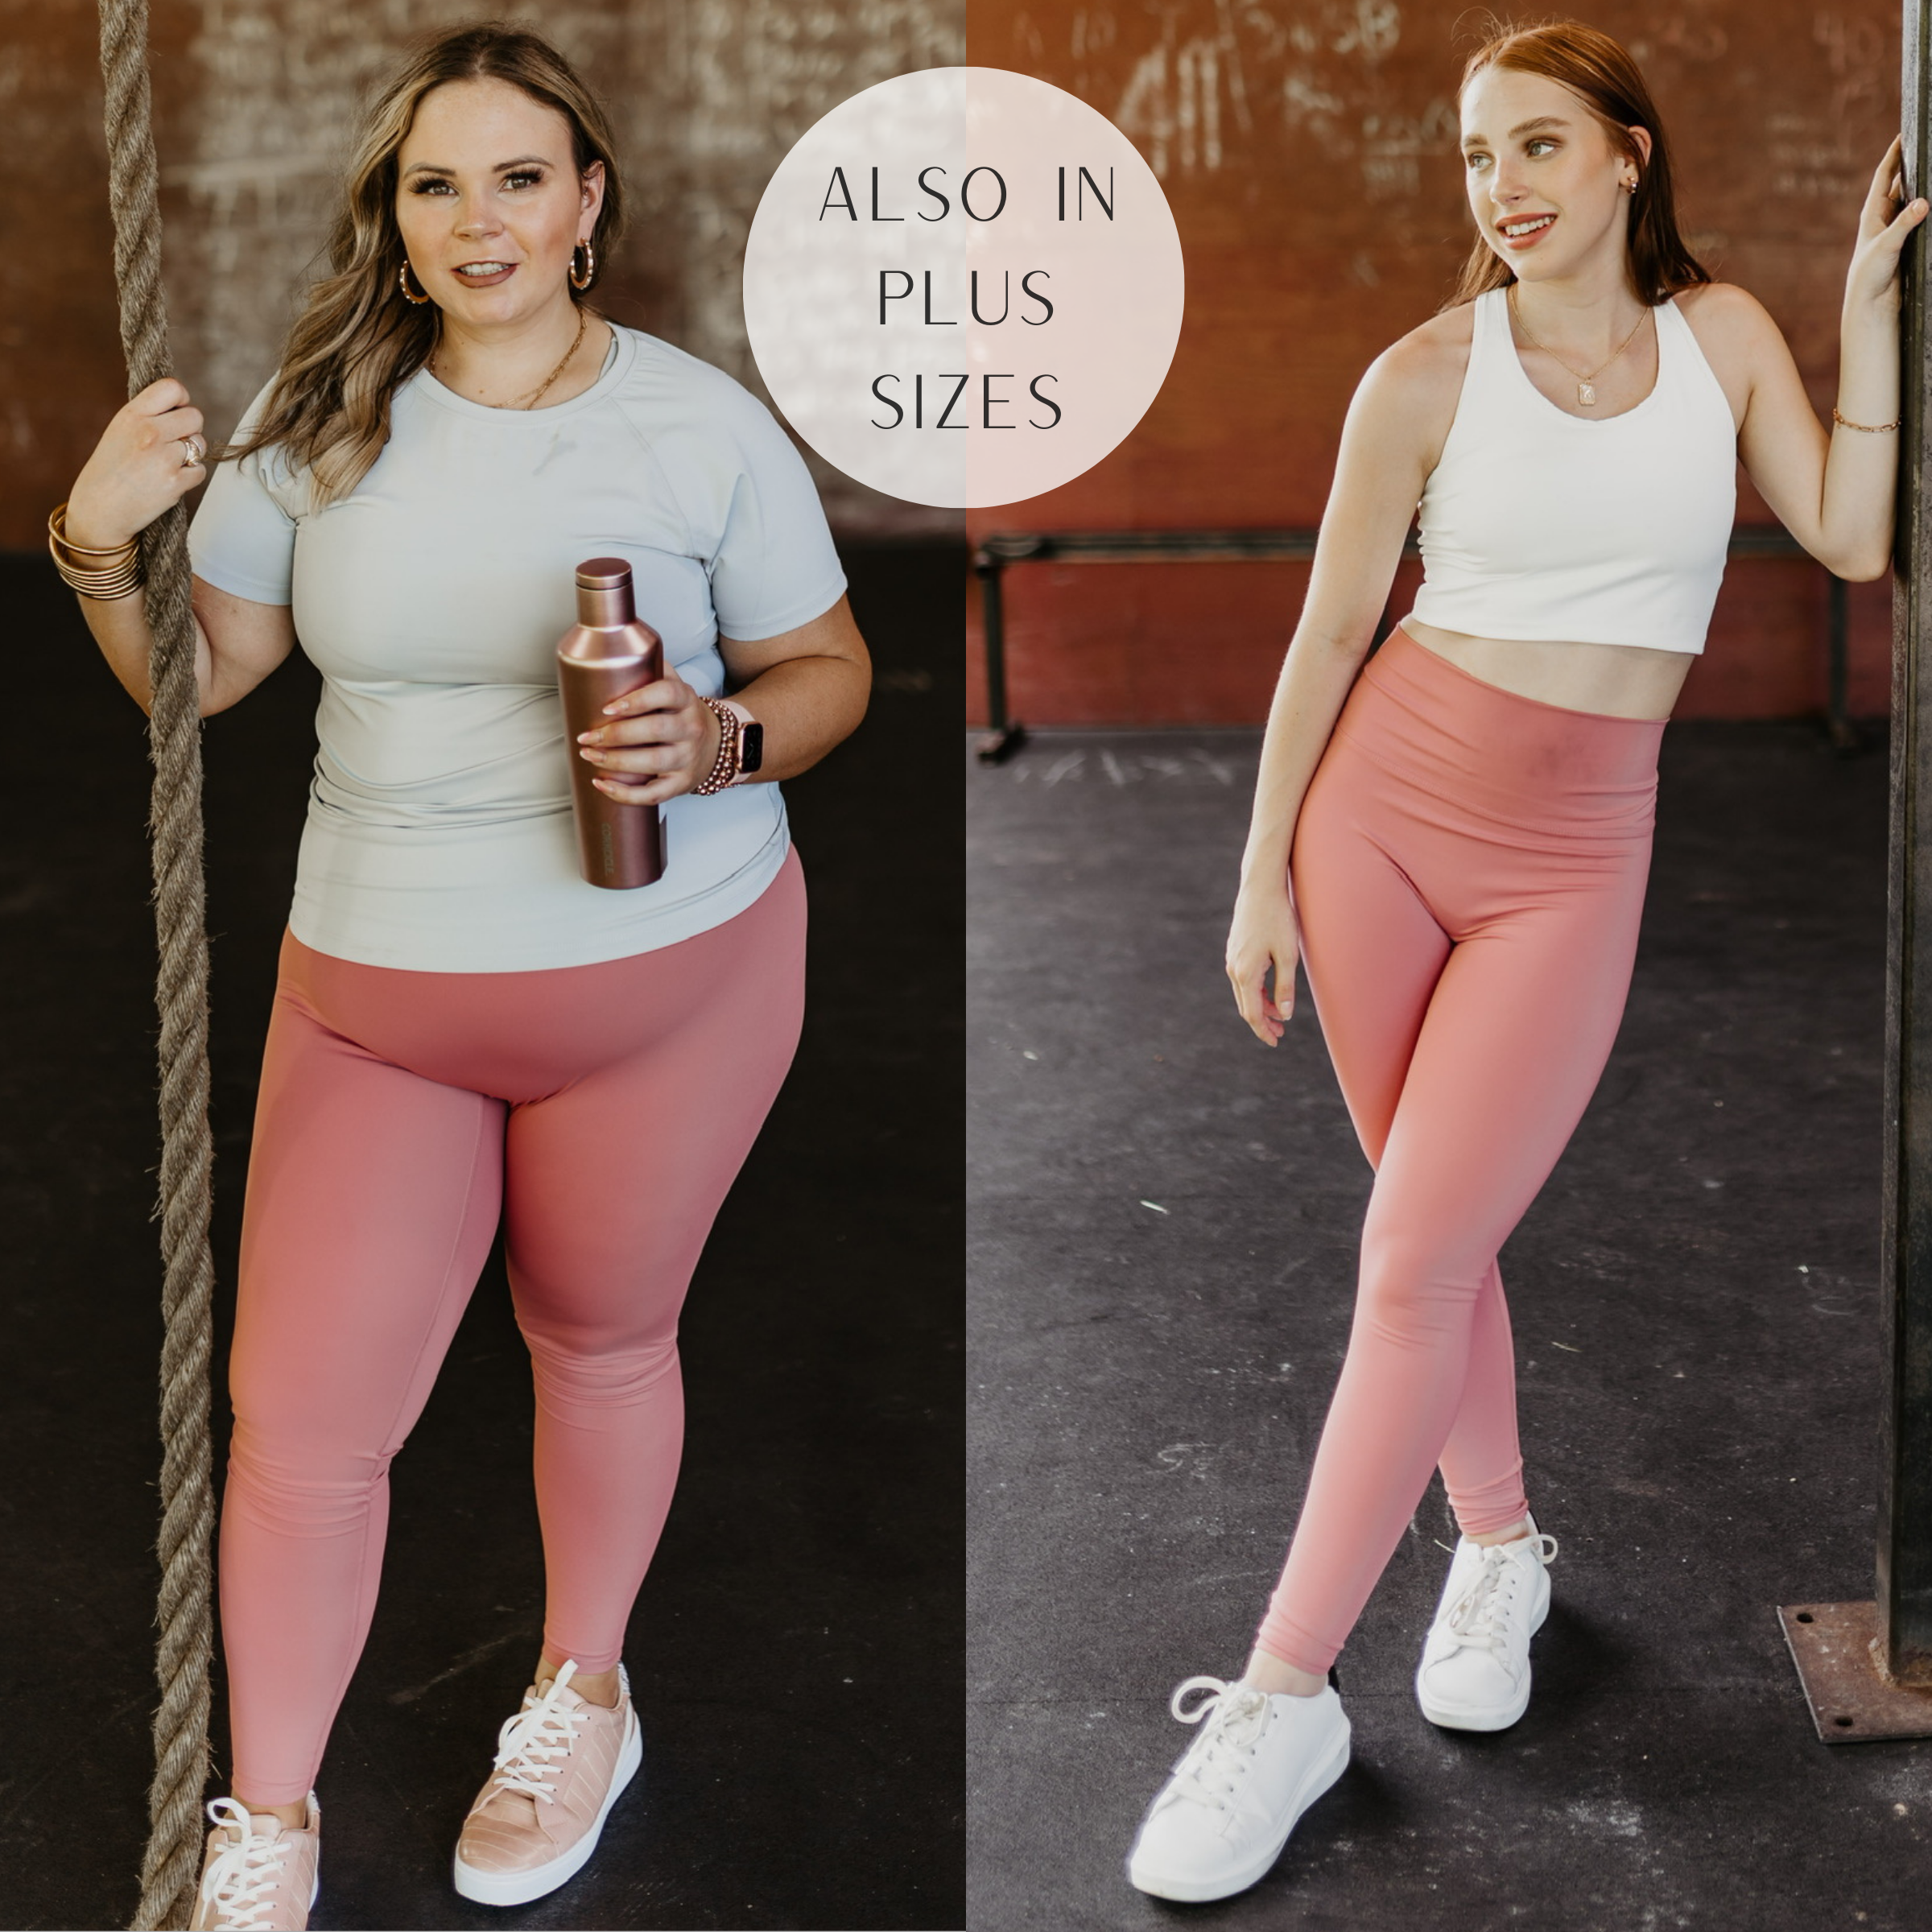 Models are wearing a pair of coral pink leggings. Size large model has it paired with a white top, white sneakers, and gold jewelry. Size small model has it paired with white sneakers, a white sports bra, and gold jewelry.